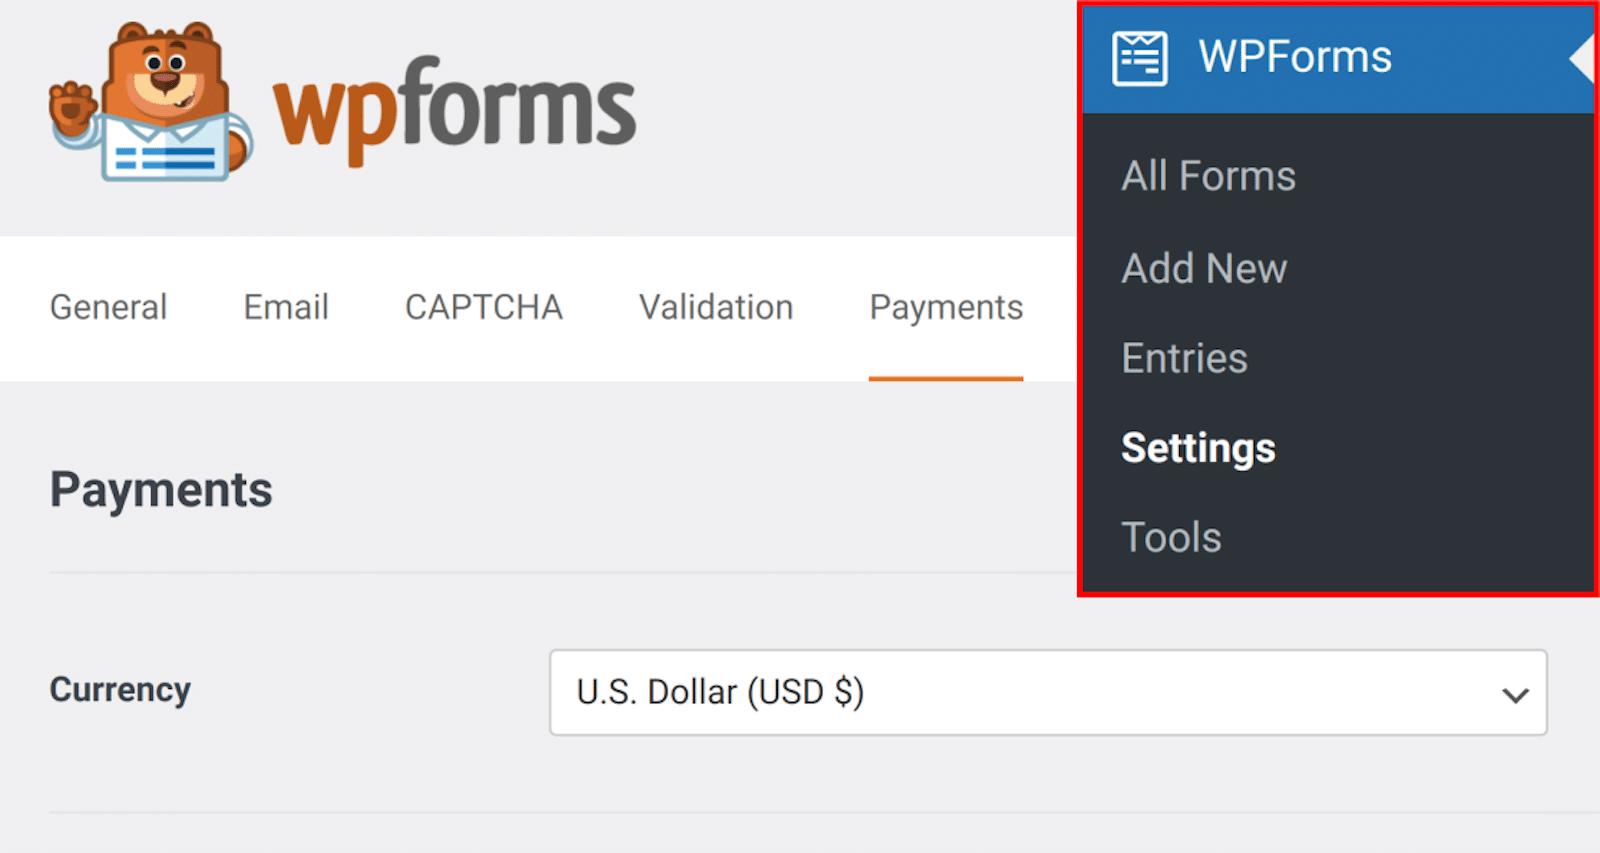 Navigating to the Payments tab in WPForms